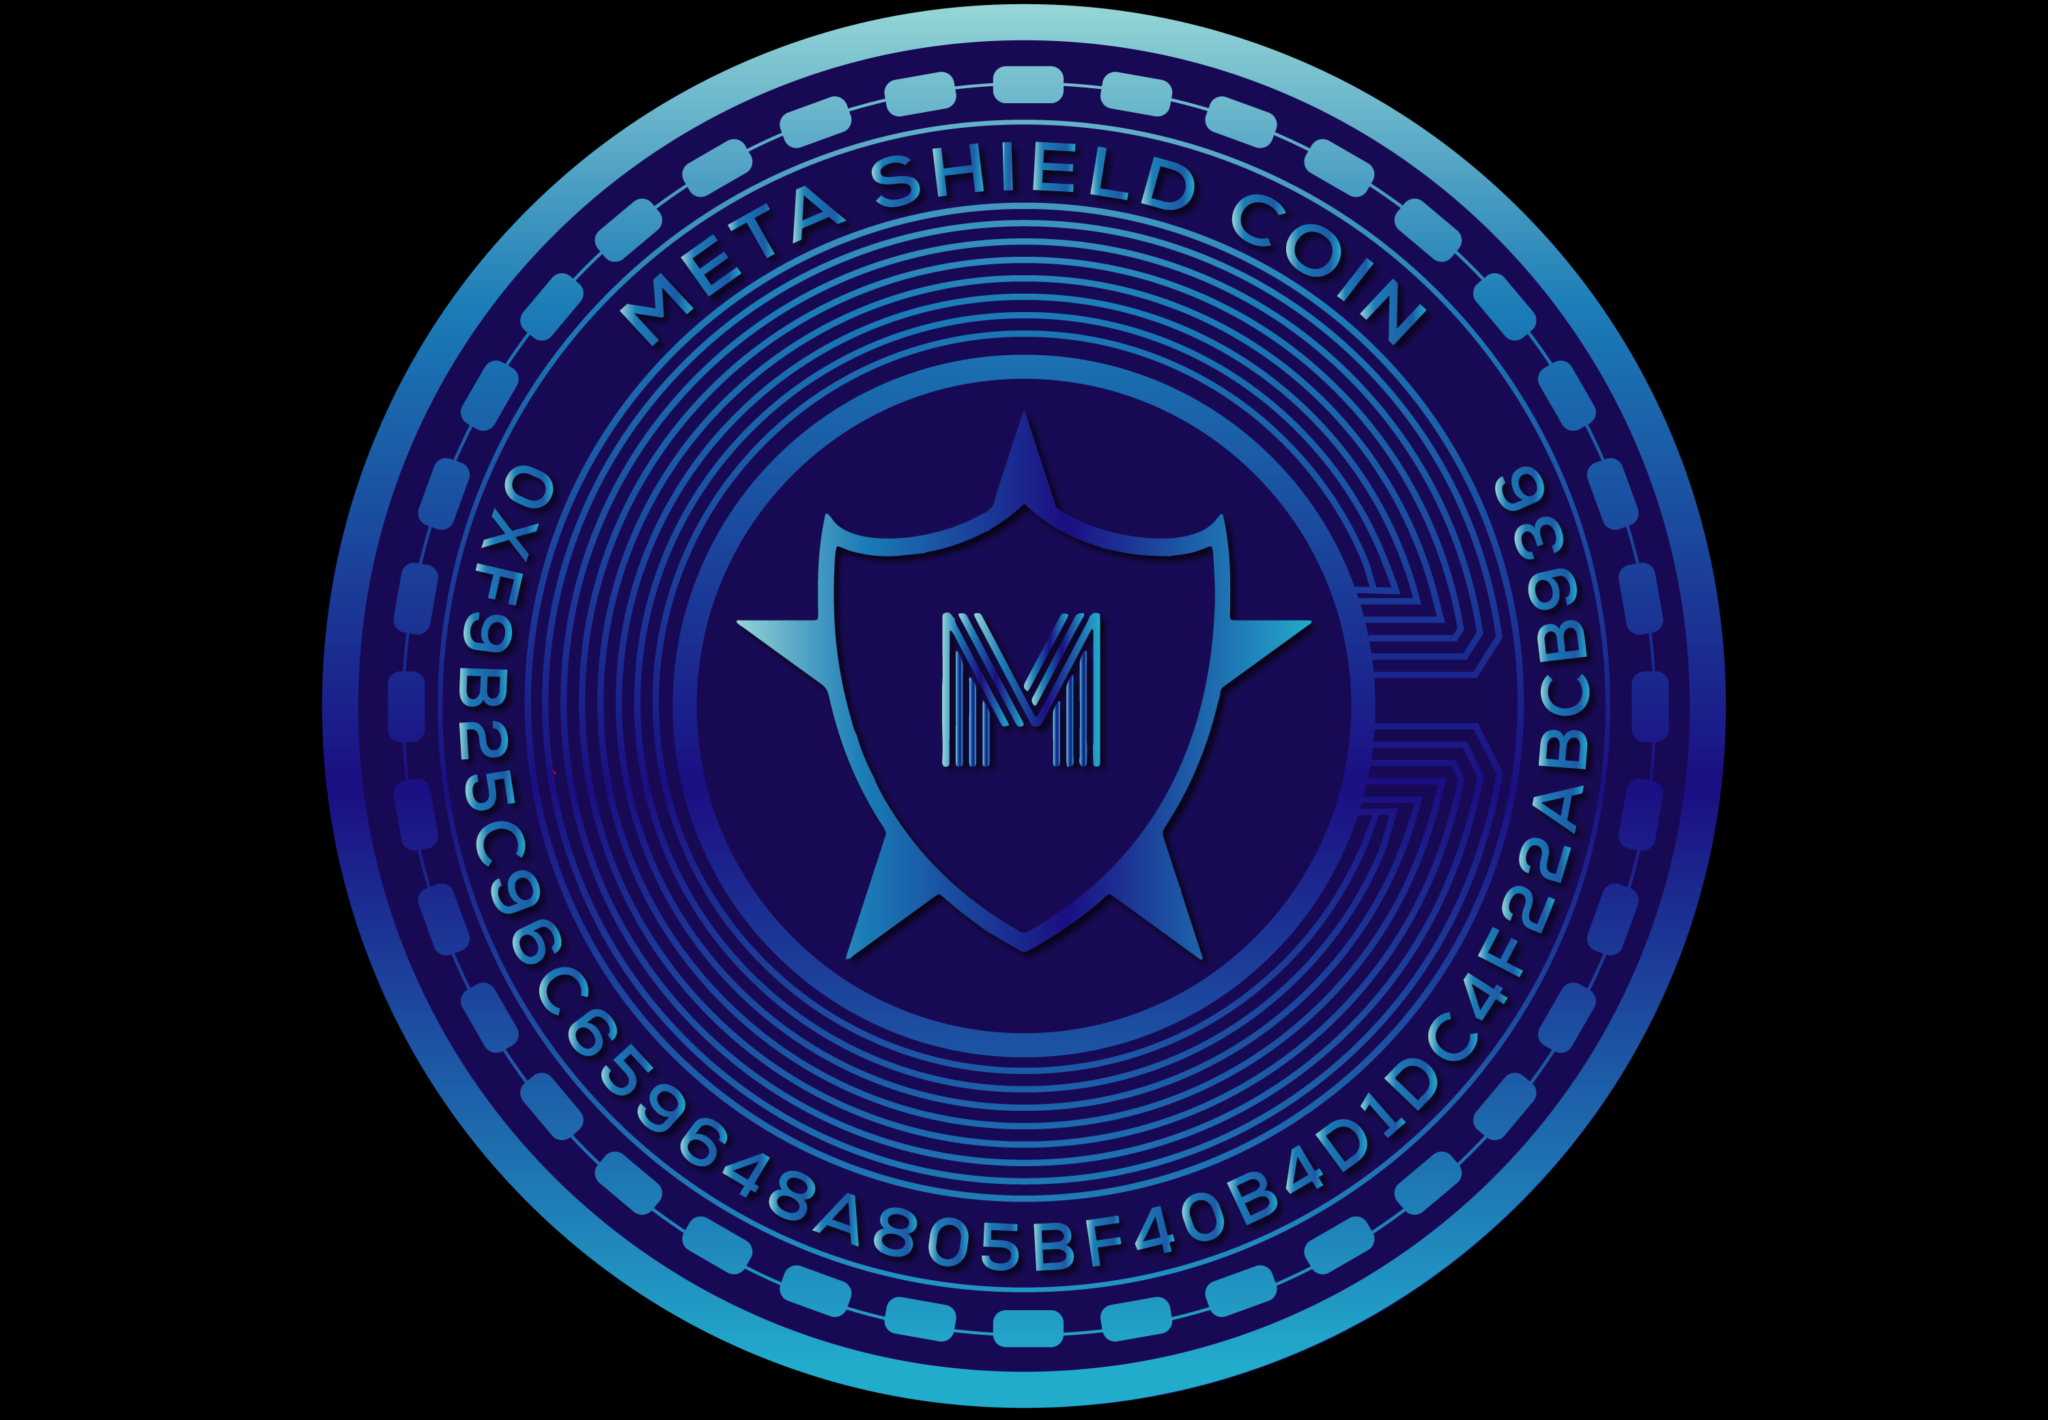 Meta Shield Coin – what is it & how to buy it